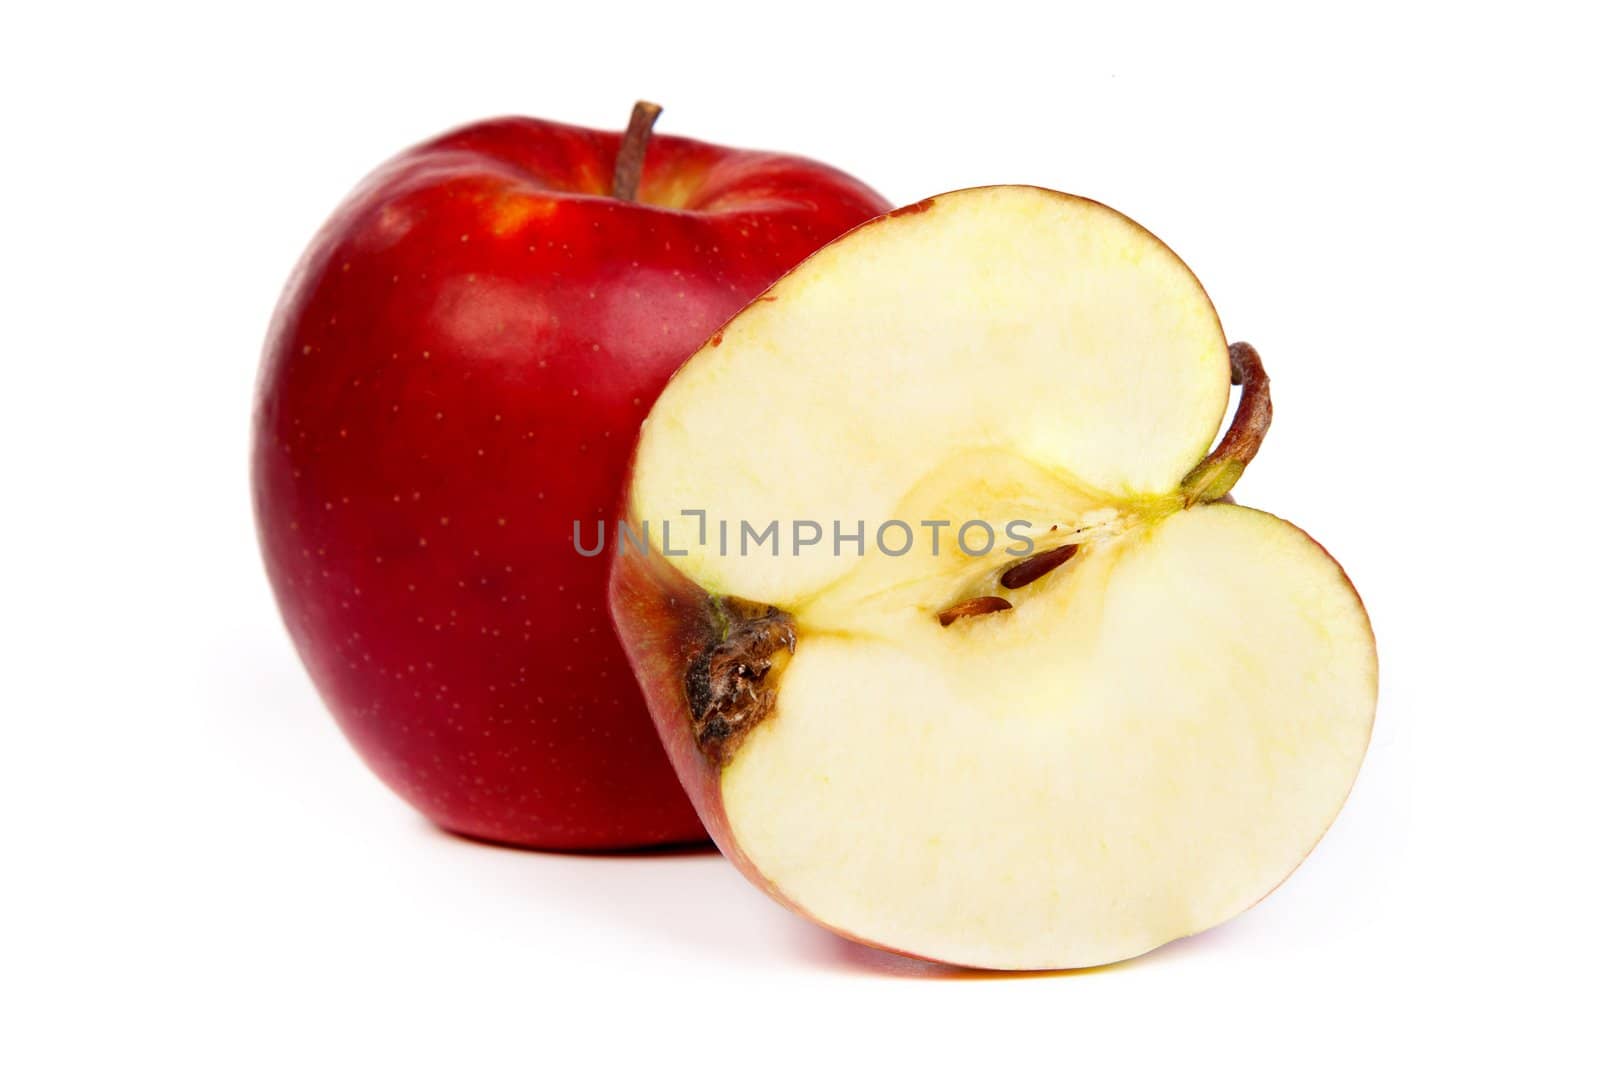 Cross section of red apple, showing pips, and core. Isolated on white,